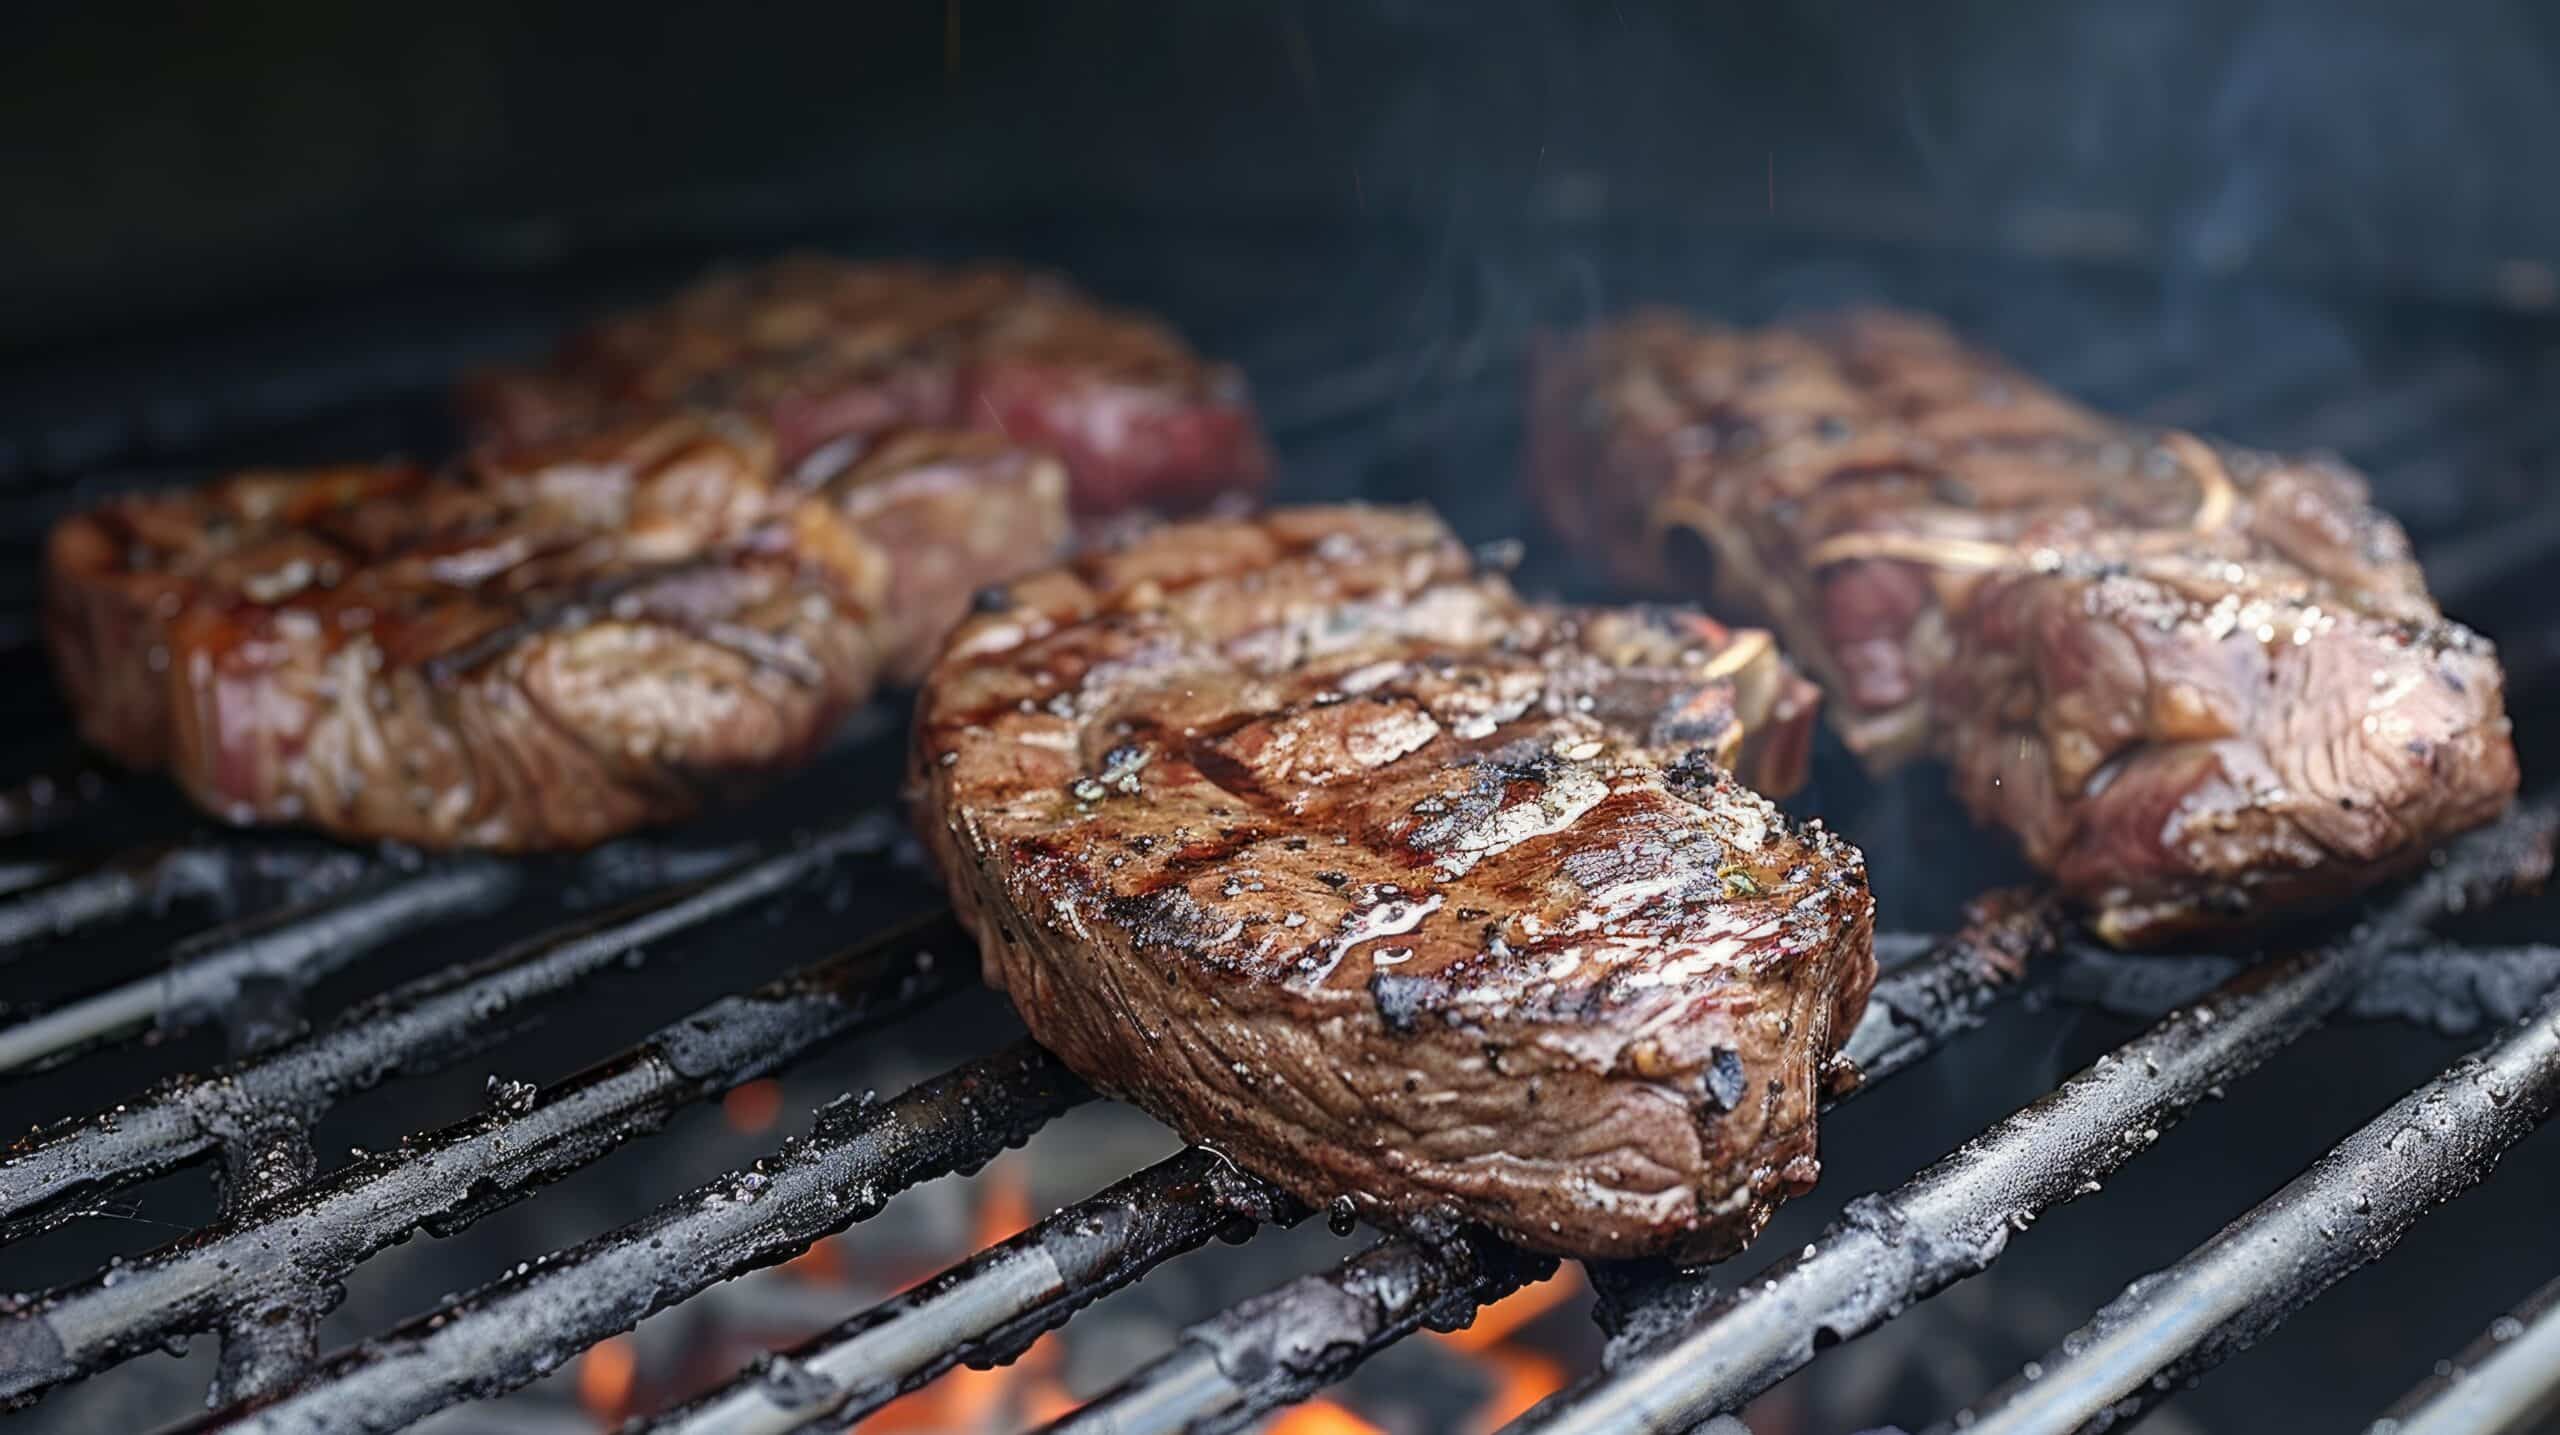 www.appr.com : How To Grill A Steak On A Gas Grill?